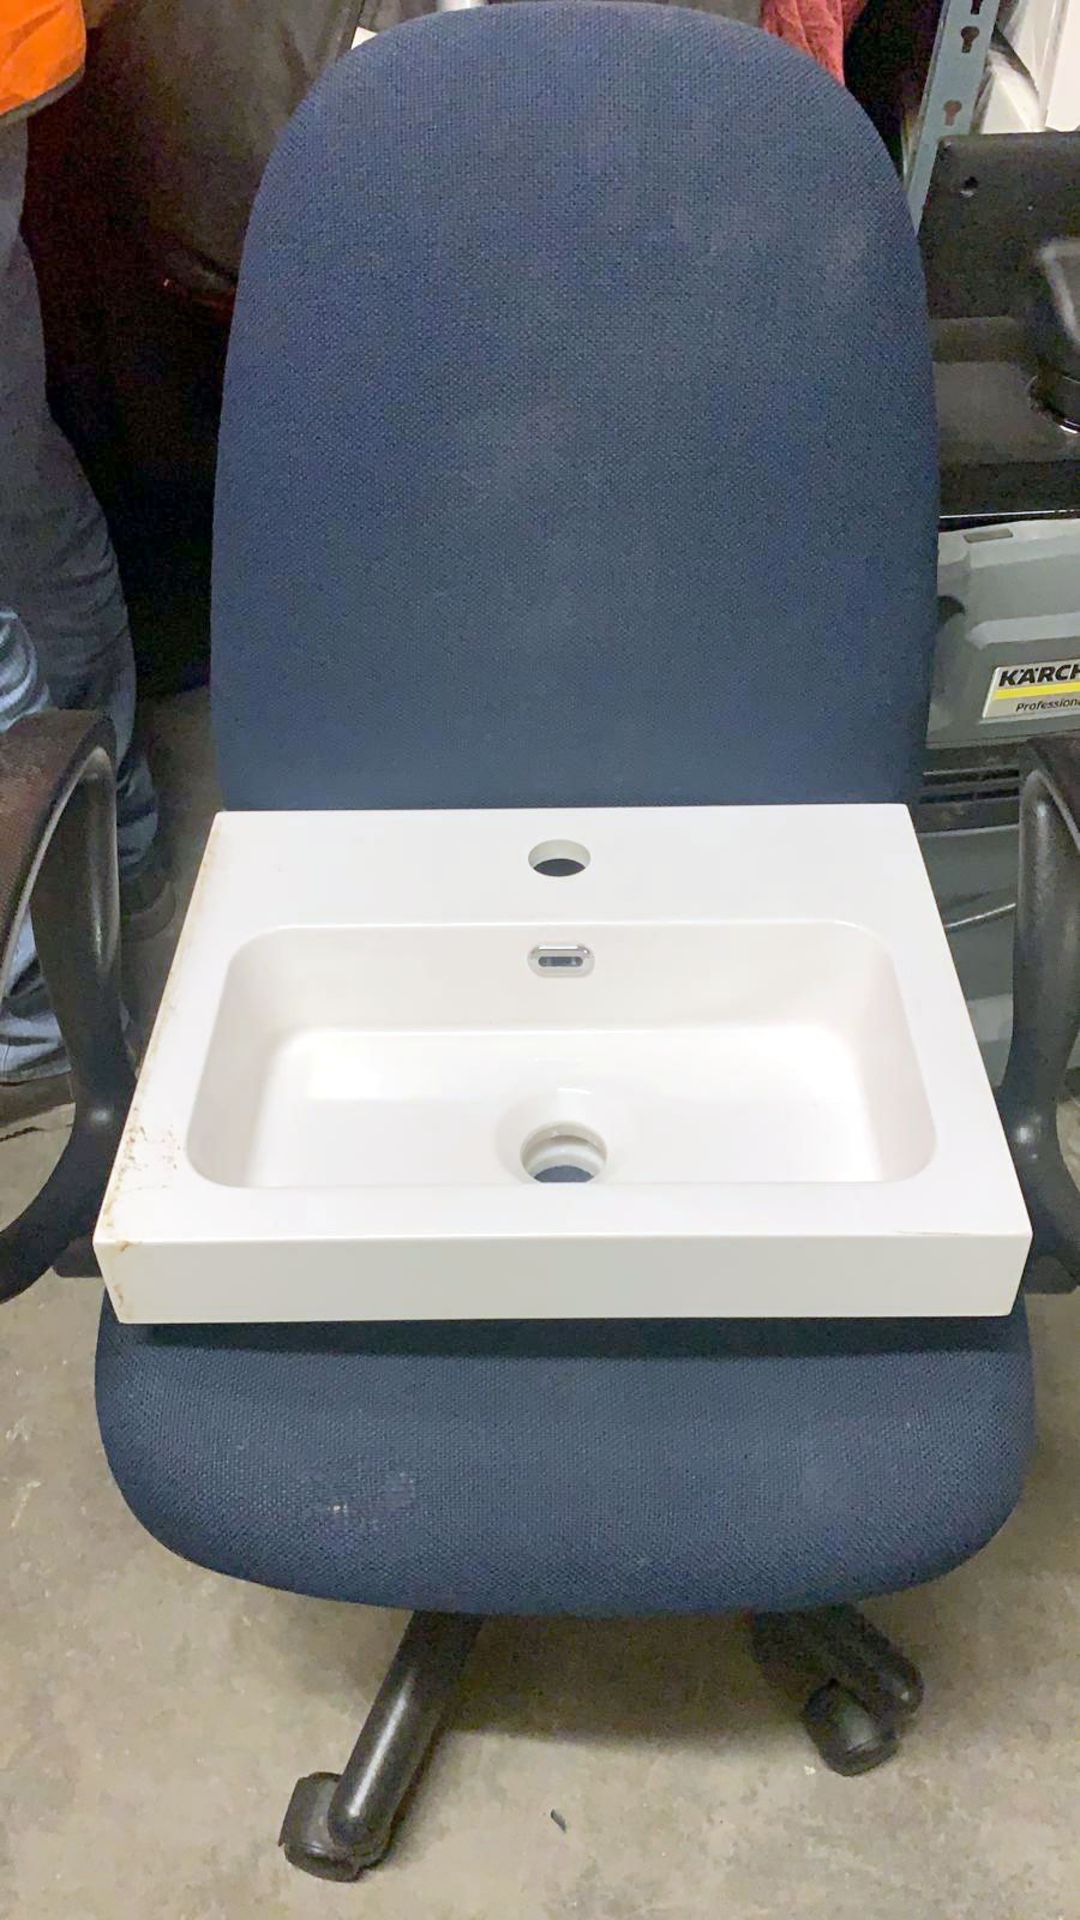 5 x Deuco MS12 Square Mineral Stone basin, one tap hole 61 x 46 x 16.5cm ( Buyers contractor to - Image 2 of 2